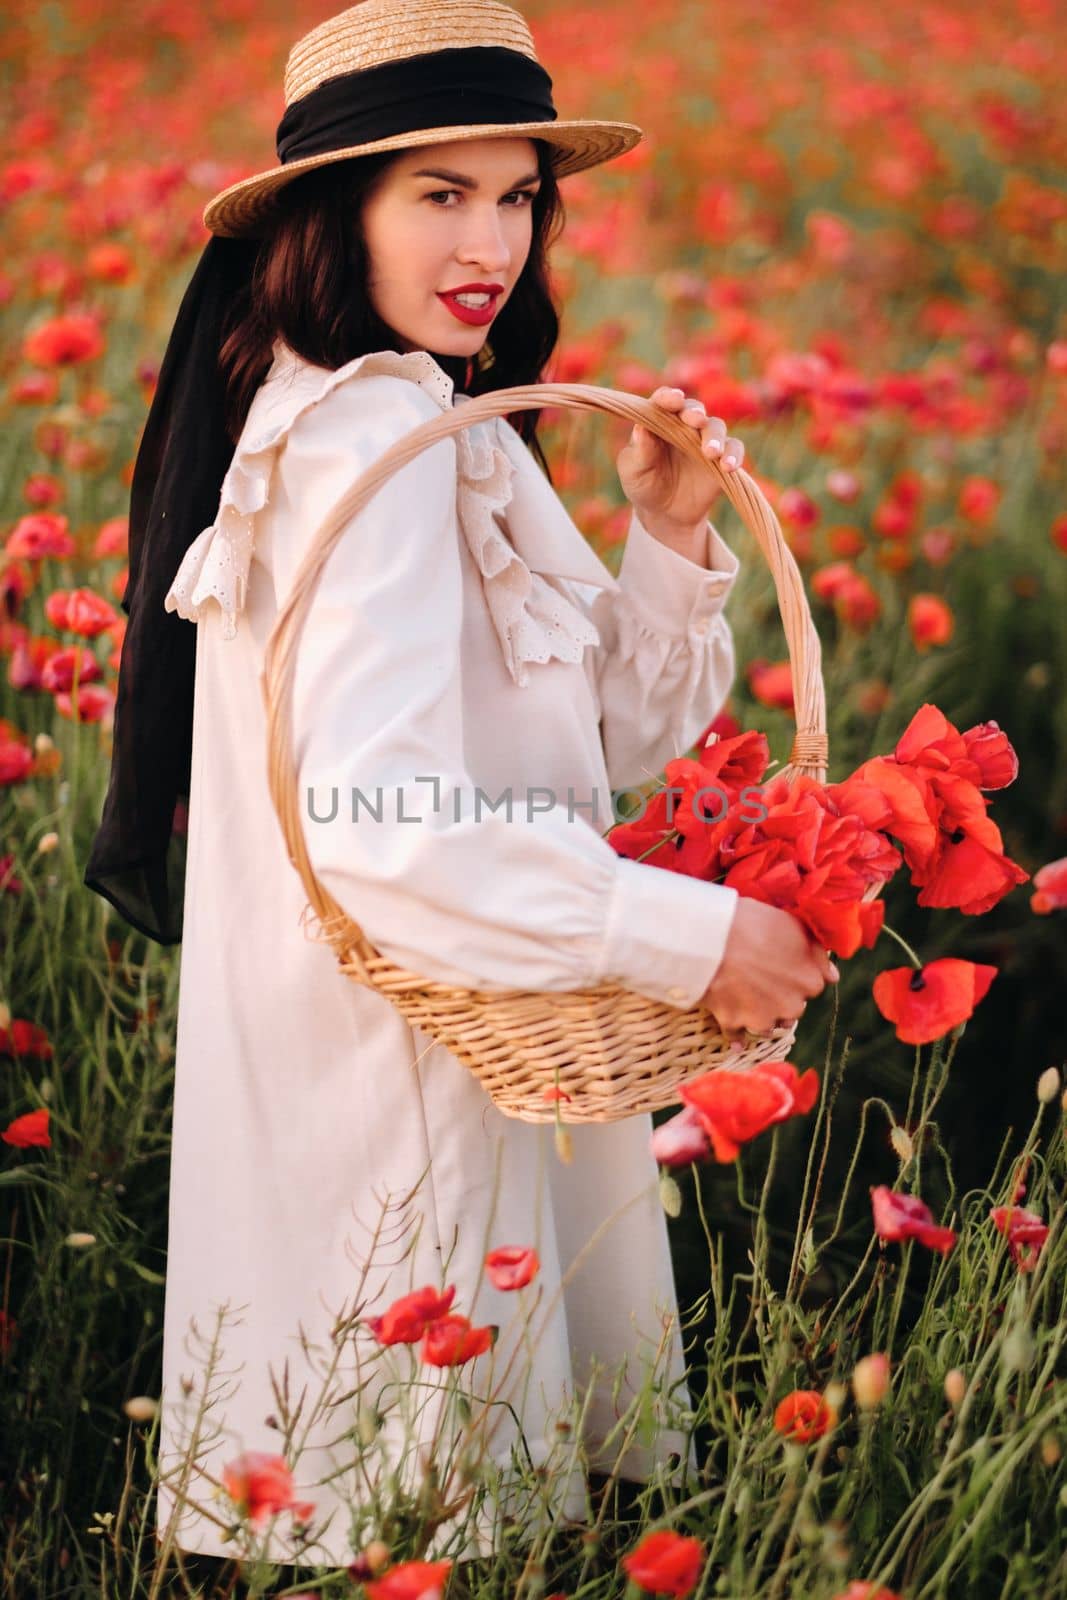 A girl in a white dress and with a basket of poppies walks through a poppy field.